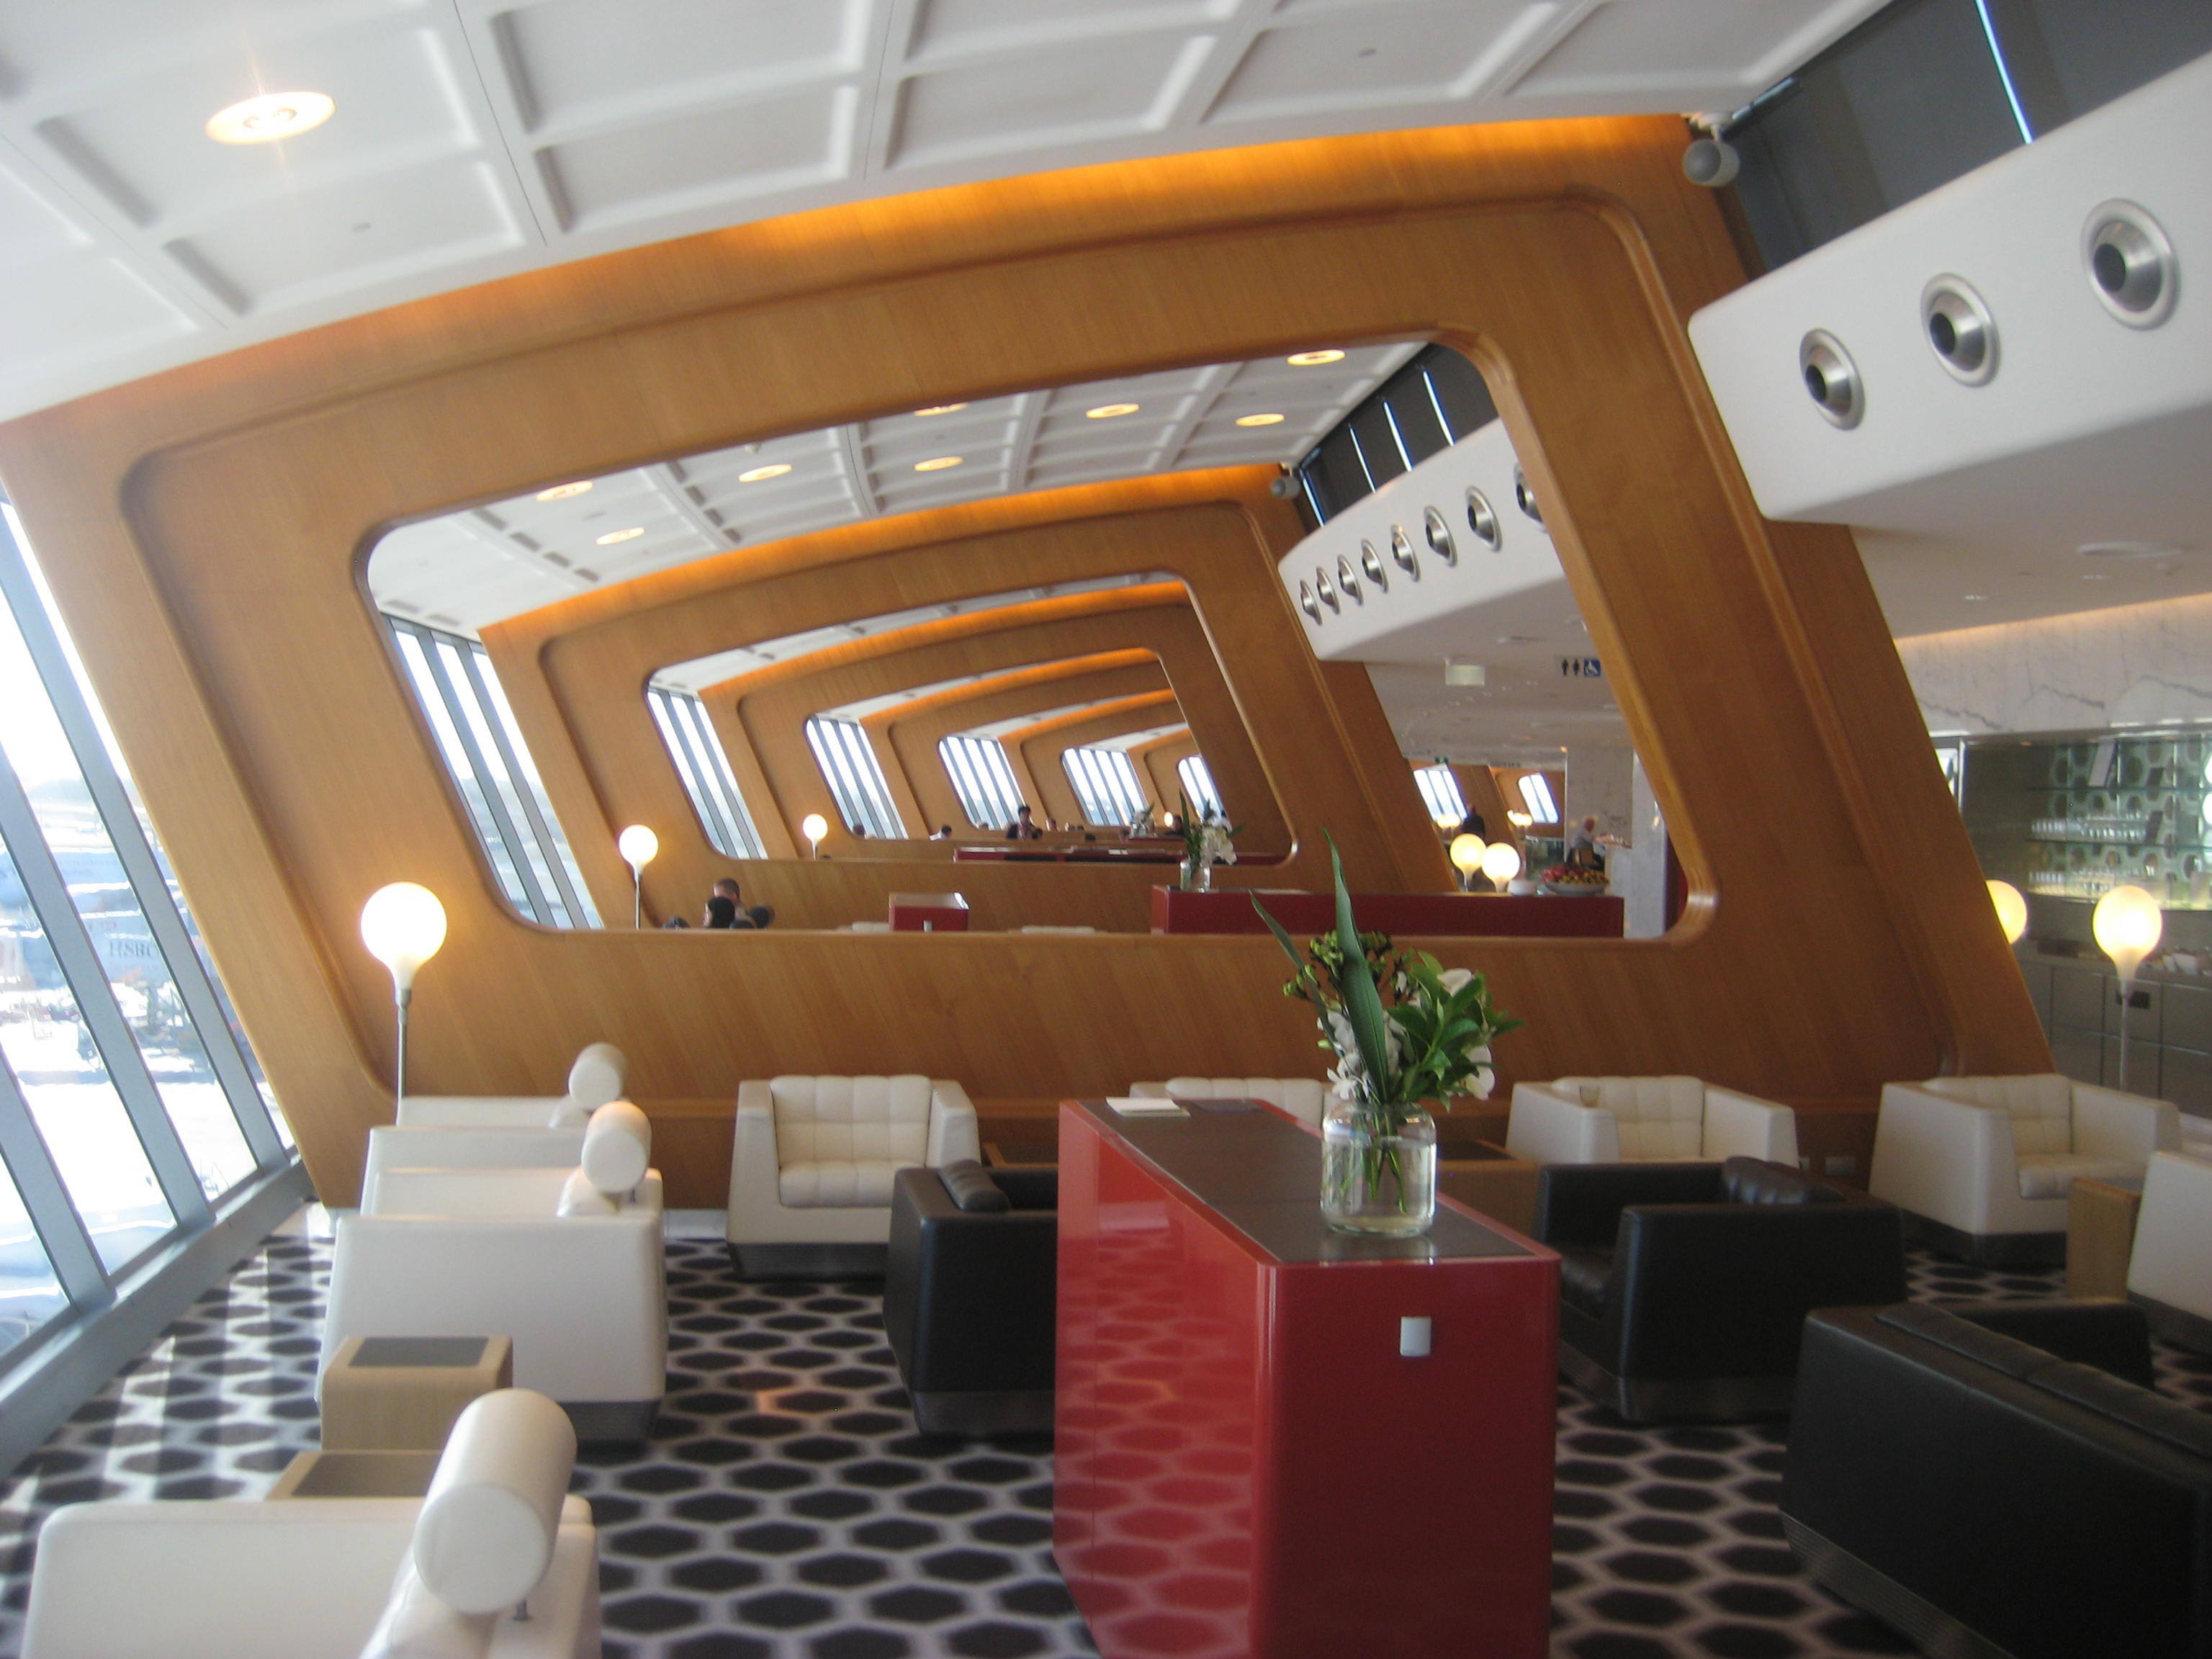 Qantas First Lounge at T1, Sydney Airport